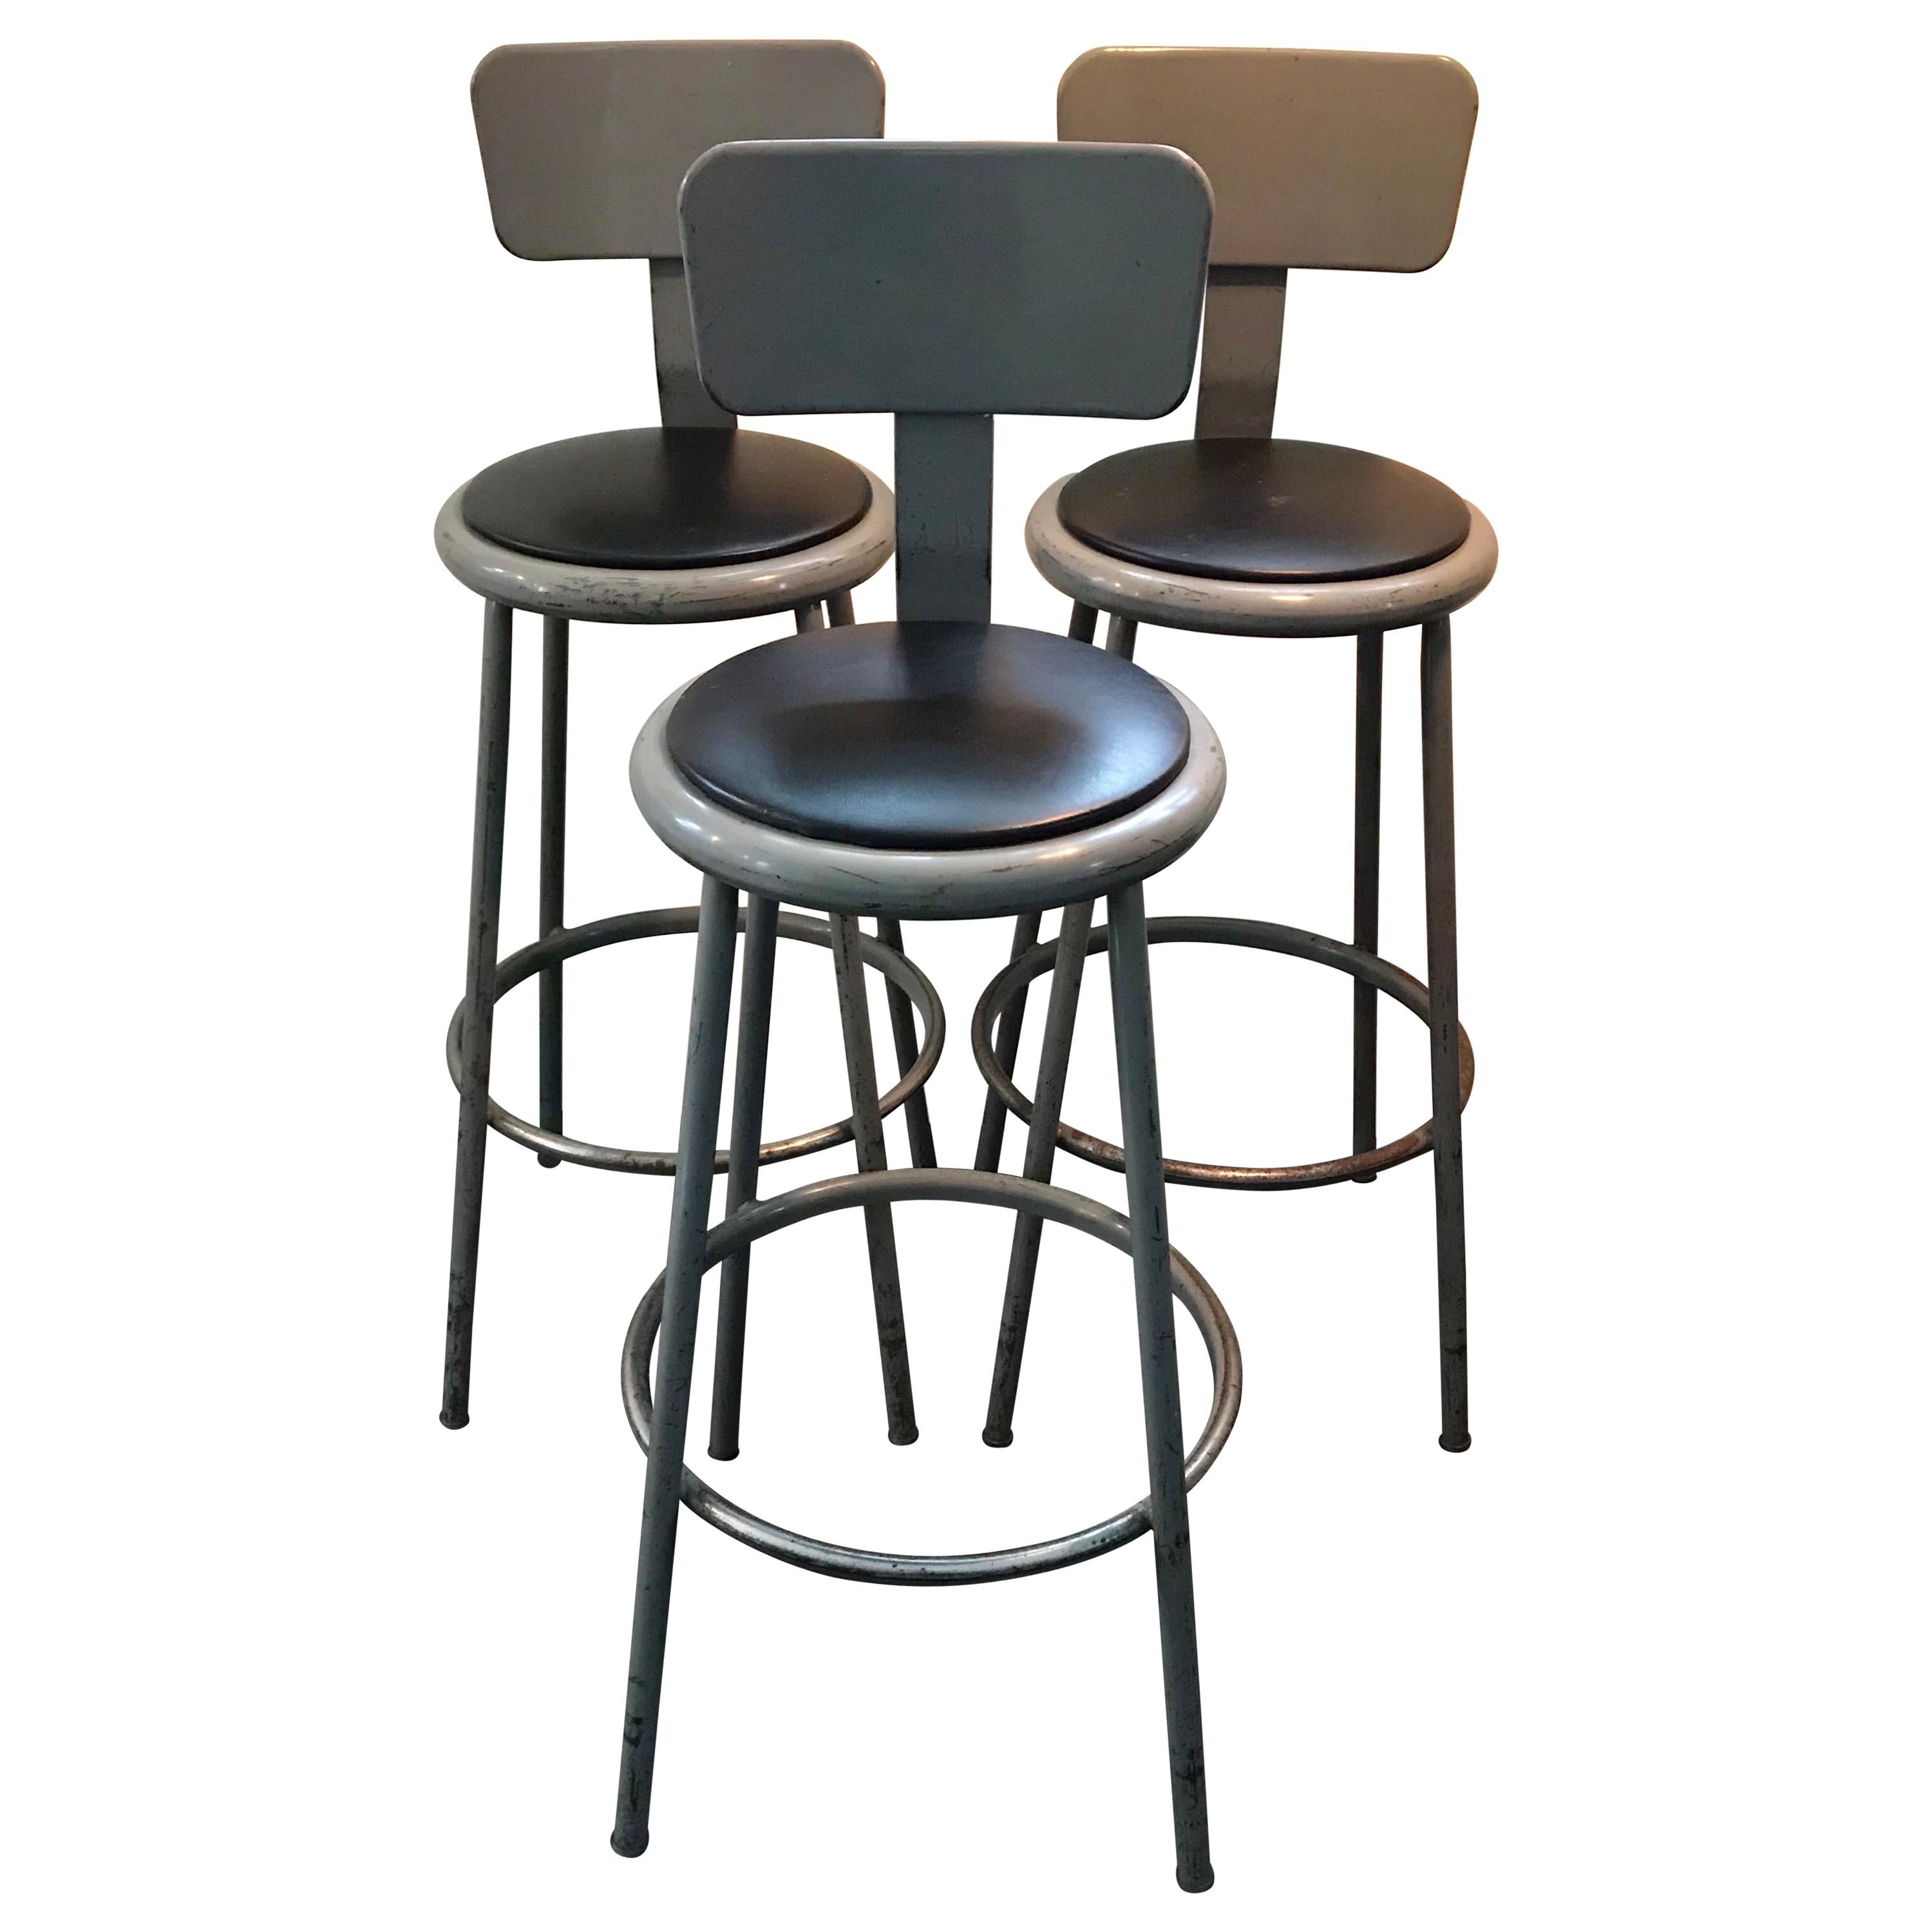 Set of Three Mid Century Industrial Metal Bar Stools with Backrests